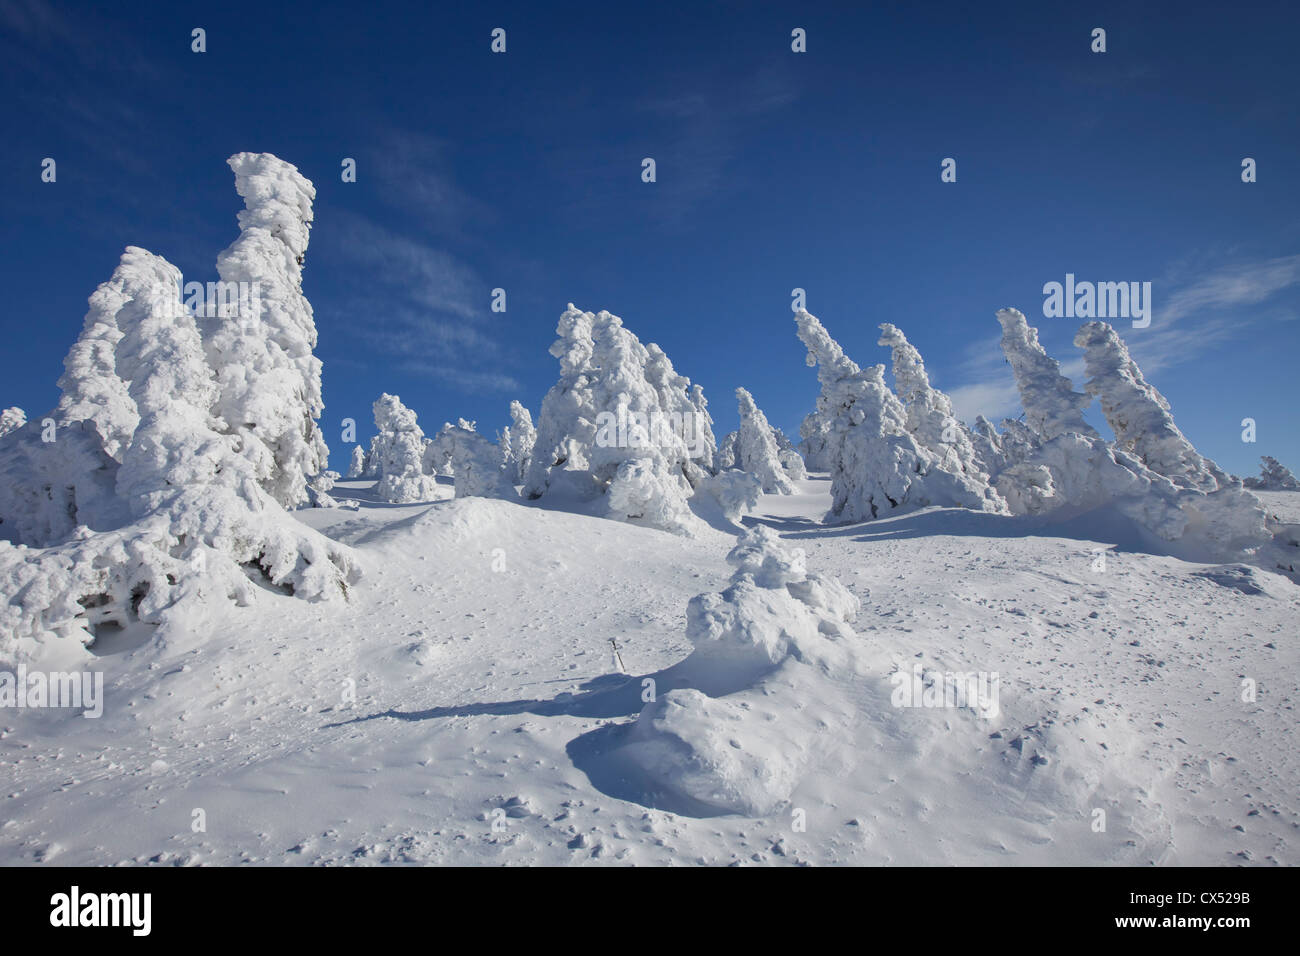 Frozen snow covered spruce trees in winter at Brocken, Blocksberg in the Harz National Park, Germany Stock Photo